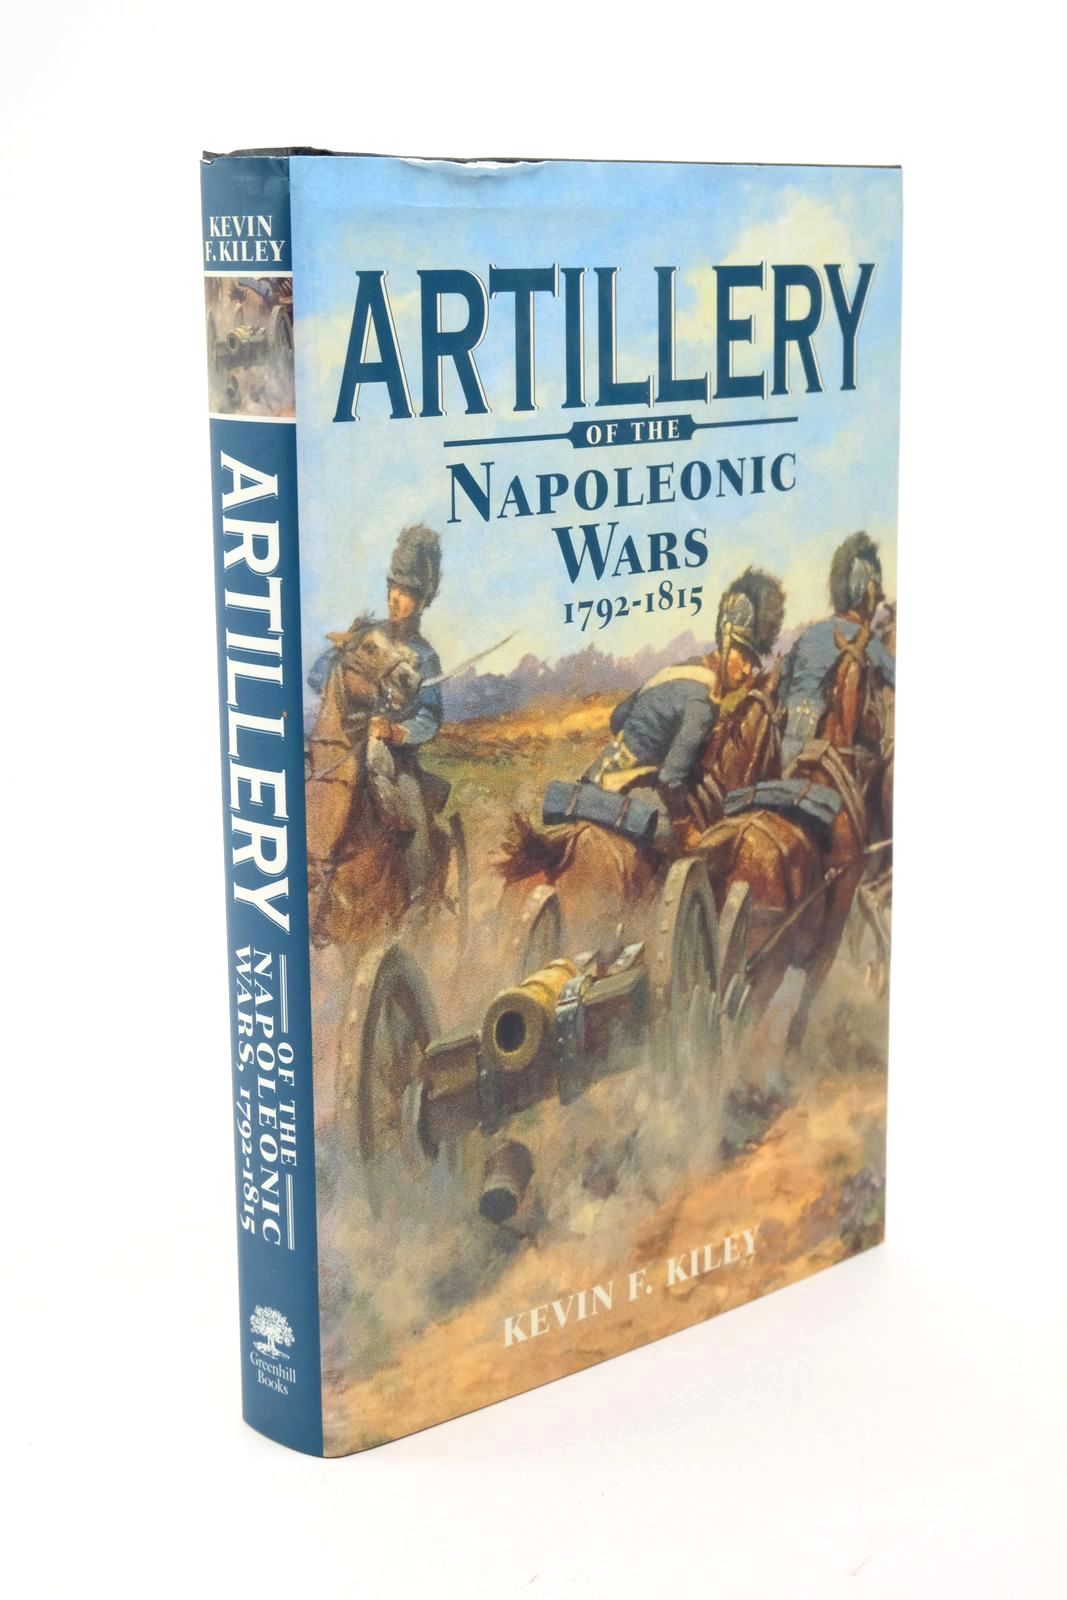 Photo of ARTILLERY OF THE NAPOLEONIC WARS 1792-1815 written by Kiley, Kevin F. published by Greenhill Books (STOCK CODE: 1322601)  for sale by Stella & Rose's Books